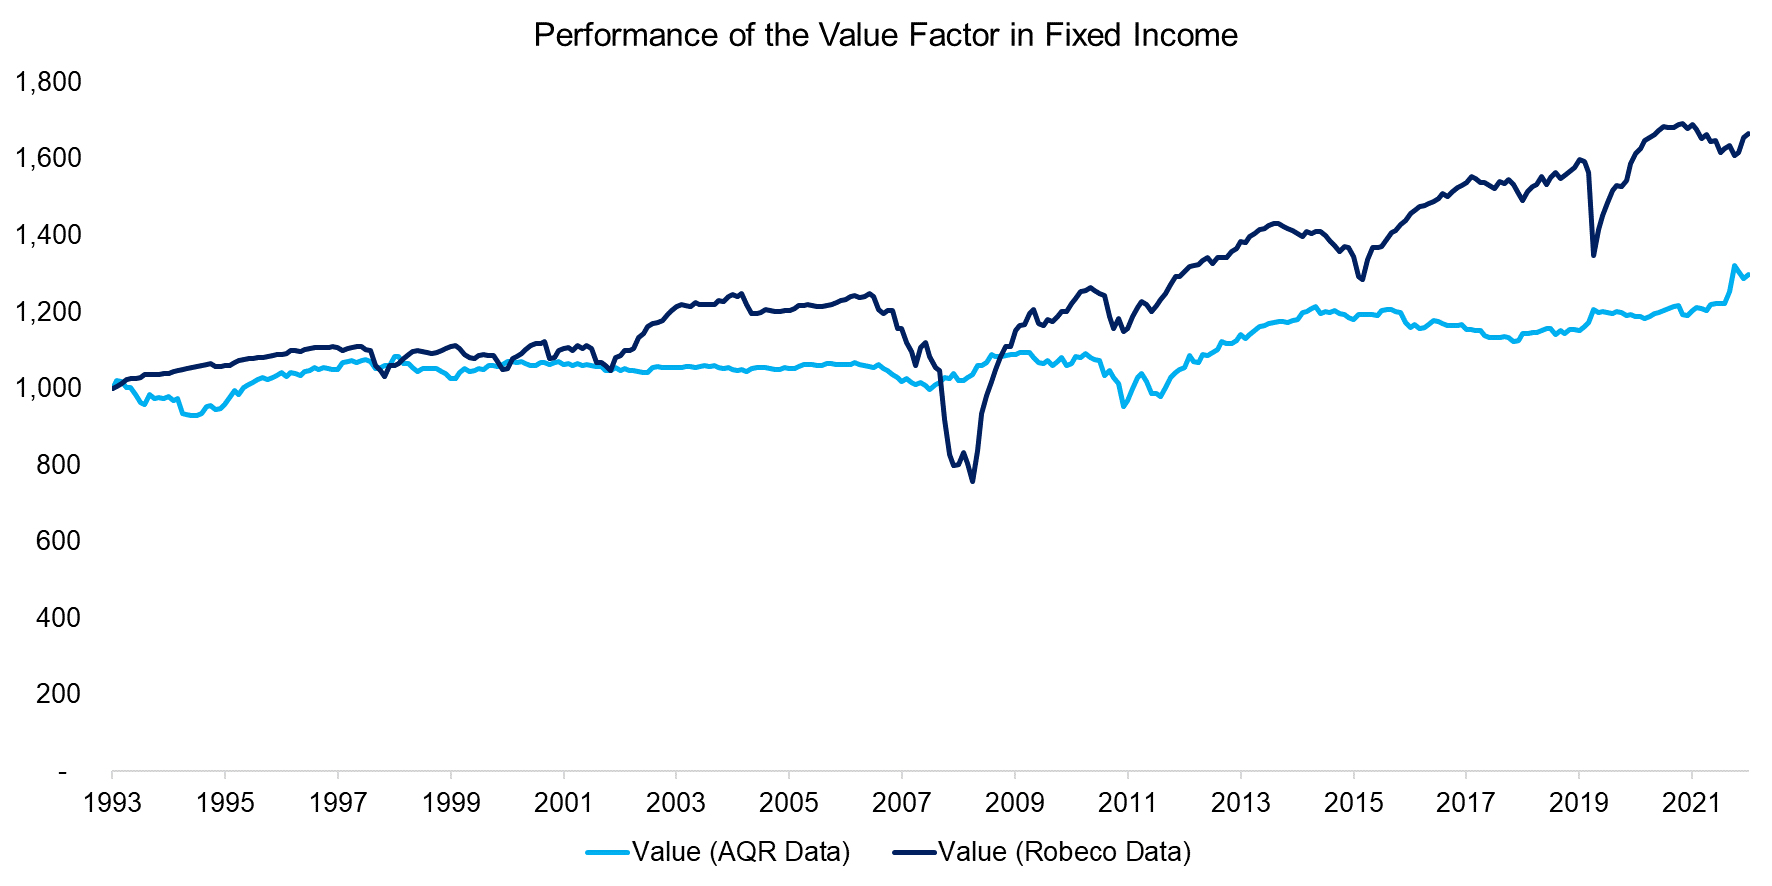 Performance of the Value Factor in Fixed Income